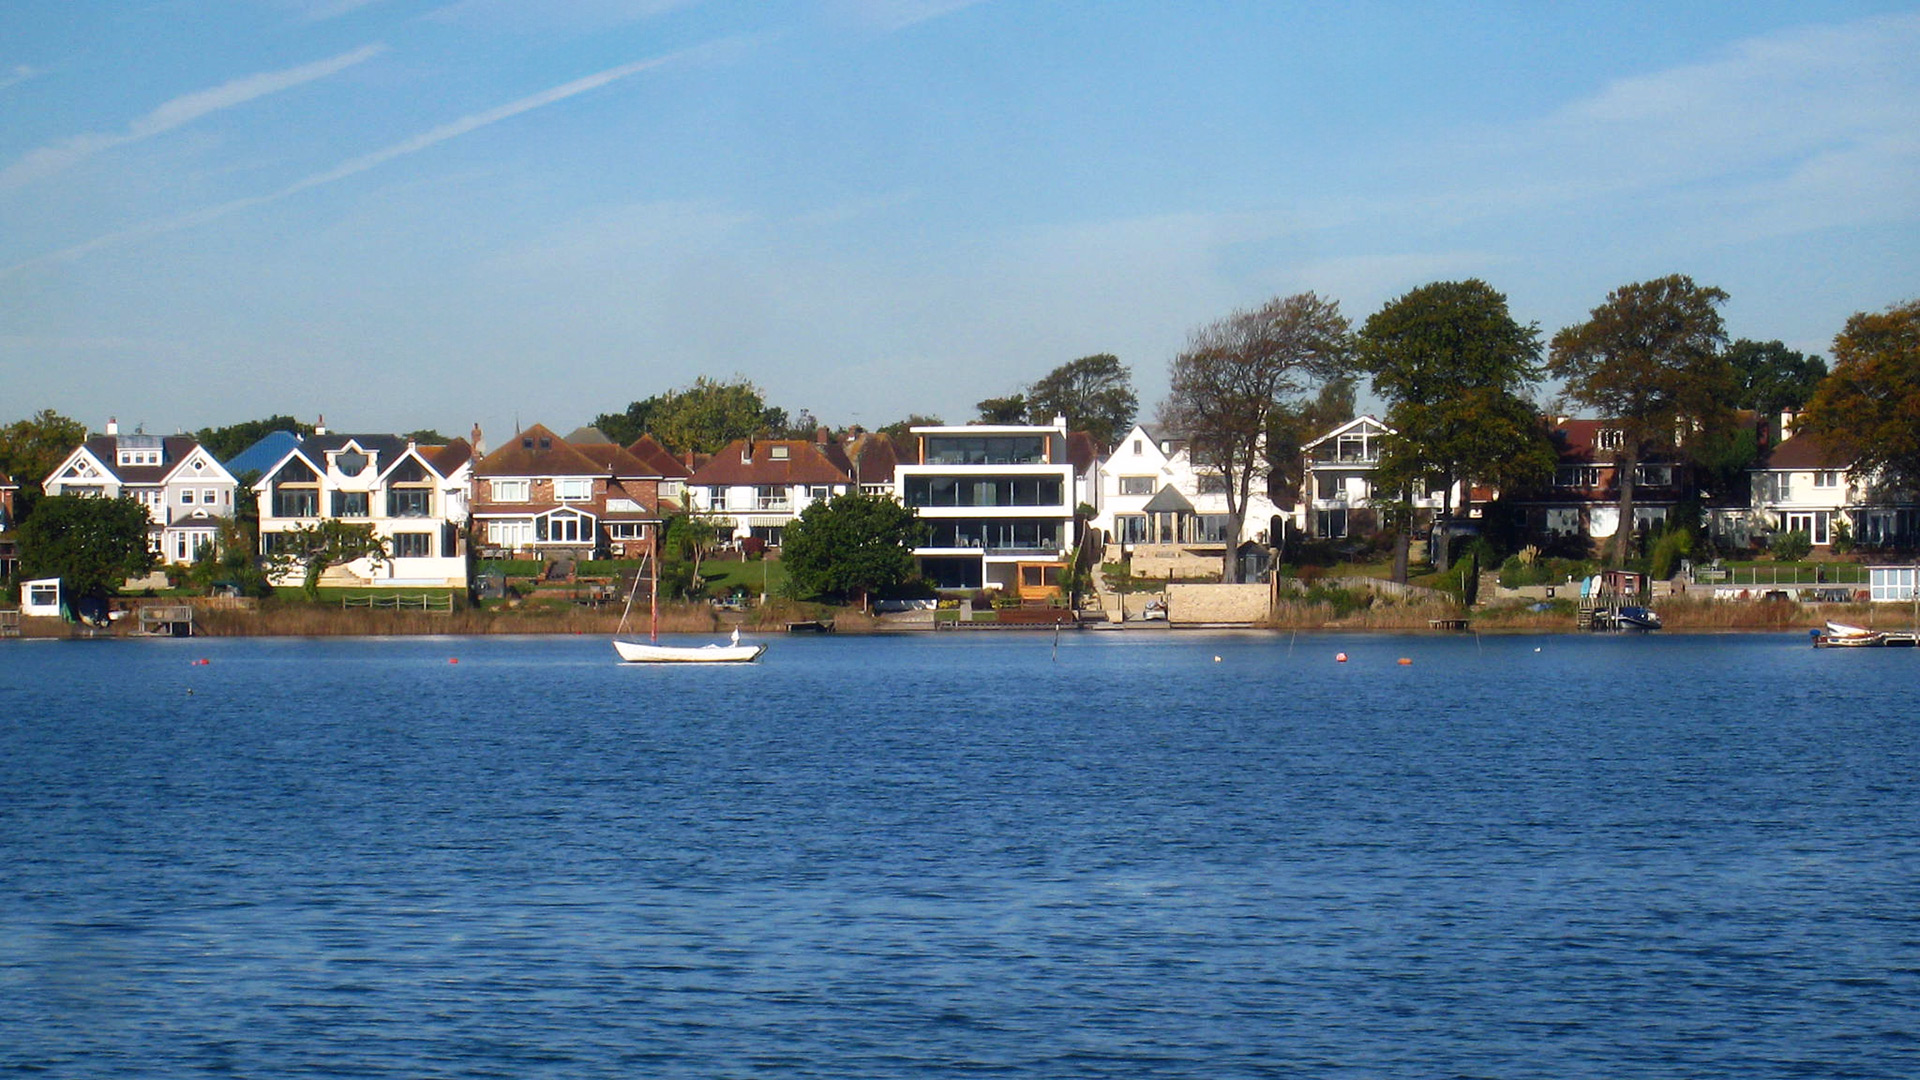 view of houses from boat across sea